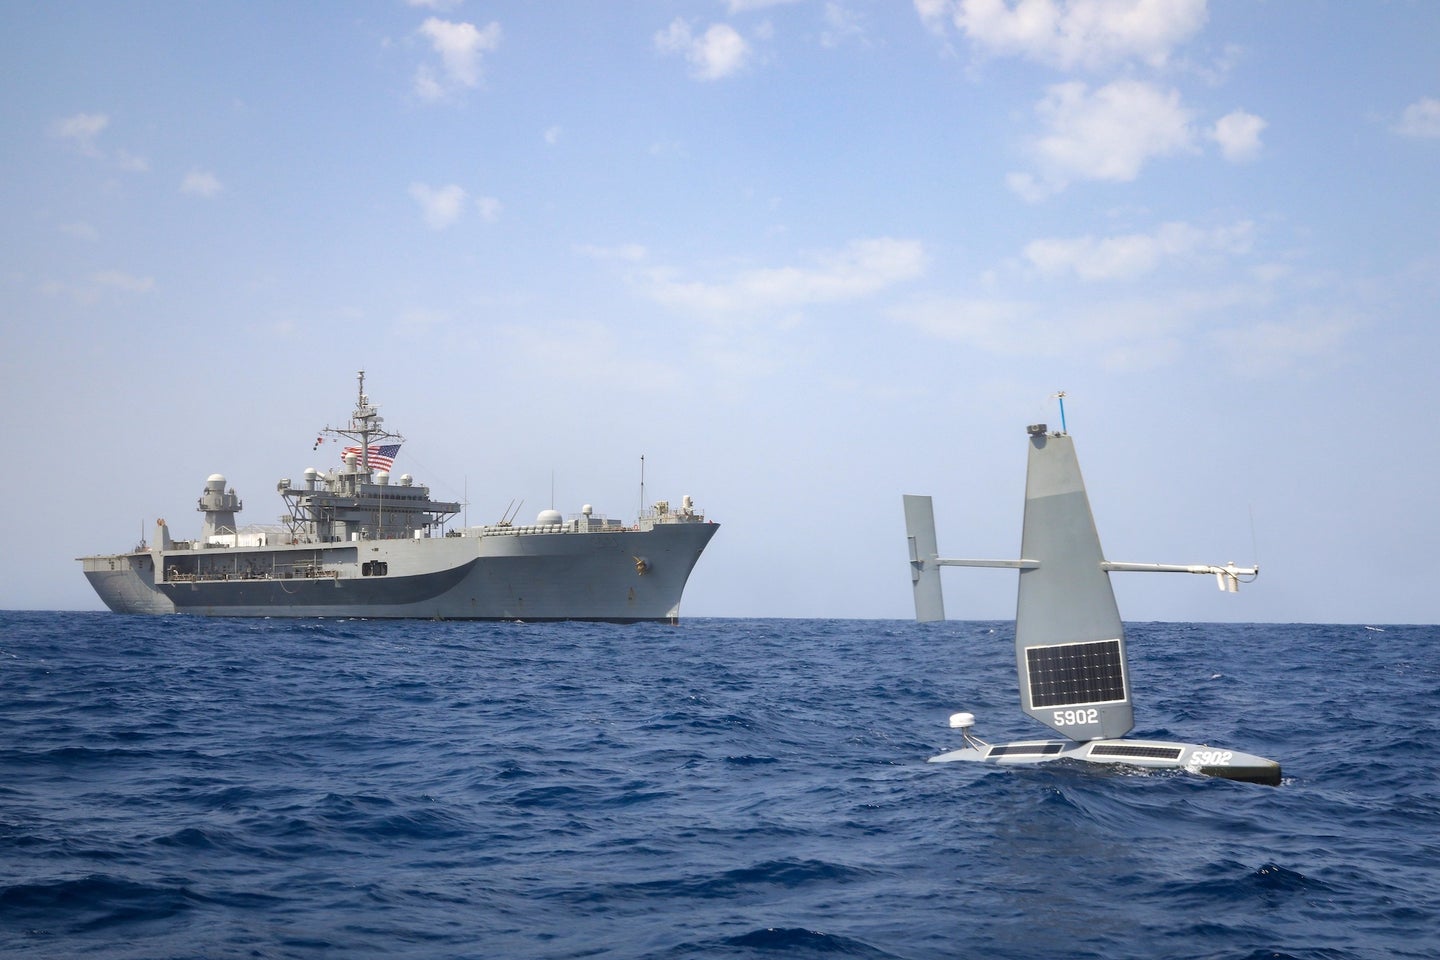 A Saildrone in the Red Sea in April, with the USS Mount Whitney in the background.